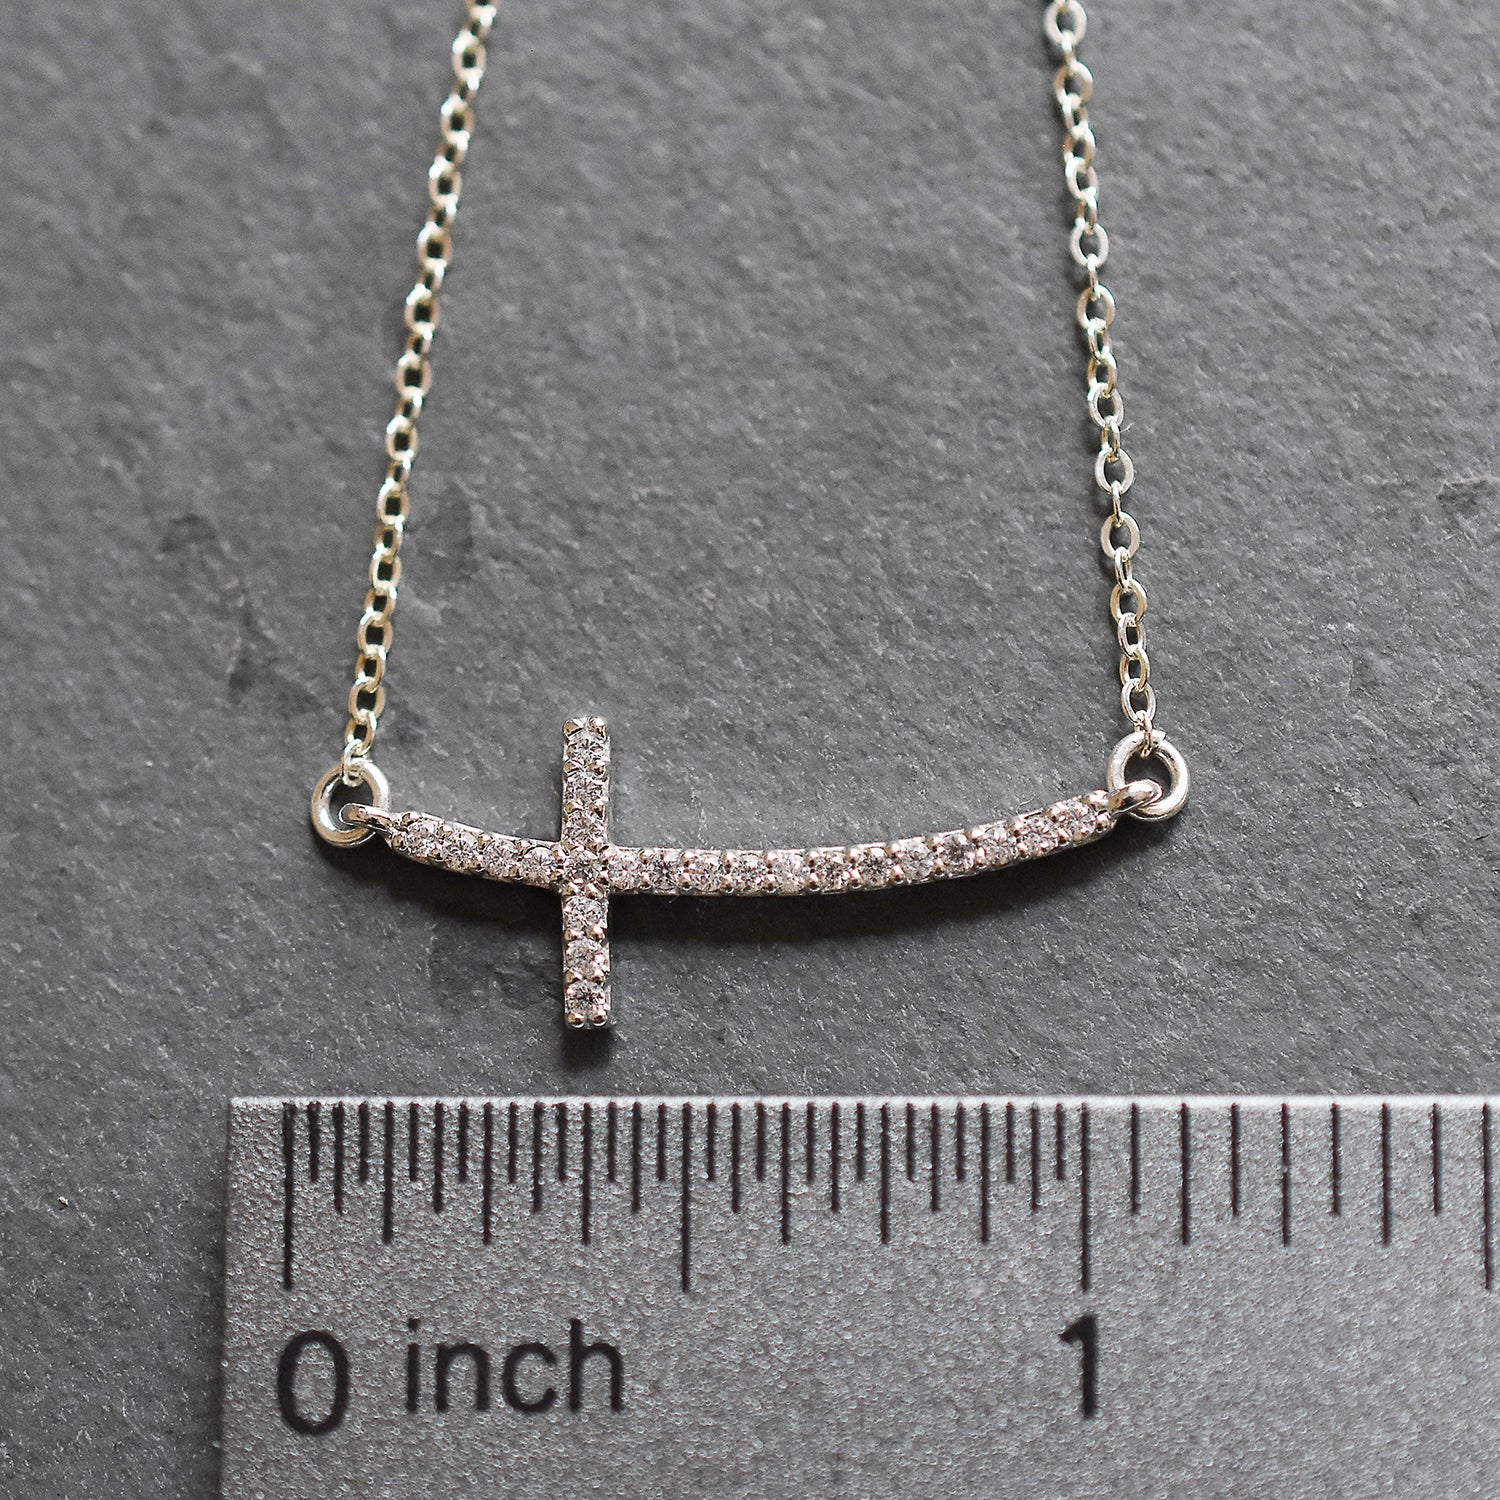 Real sterling silver .925 small sideways cross pendant necklace 16